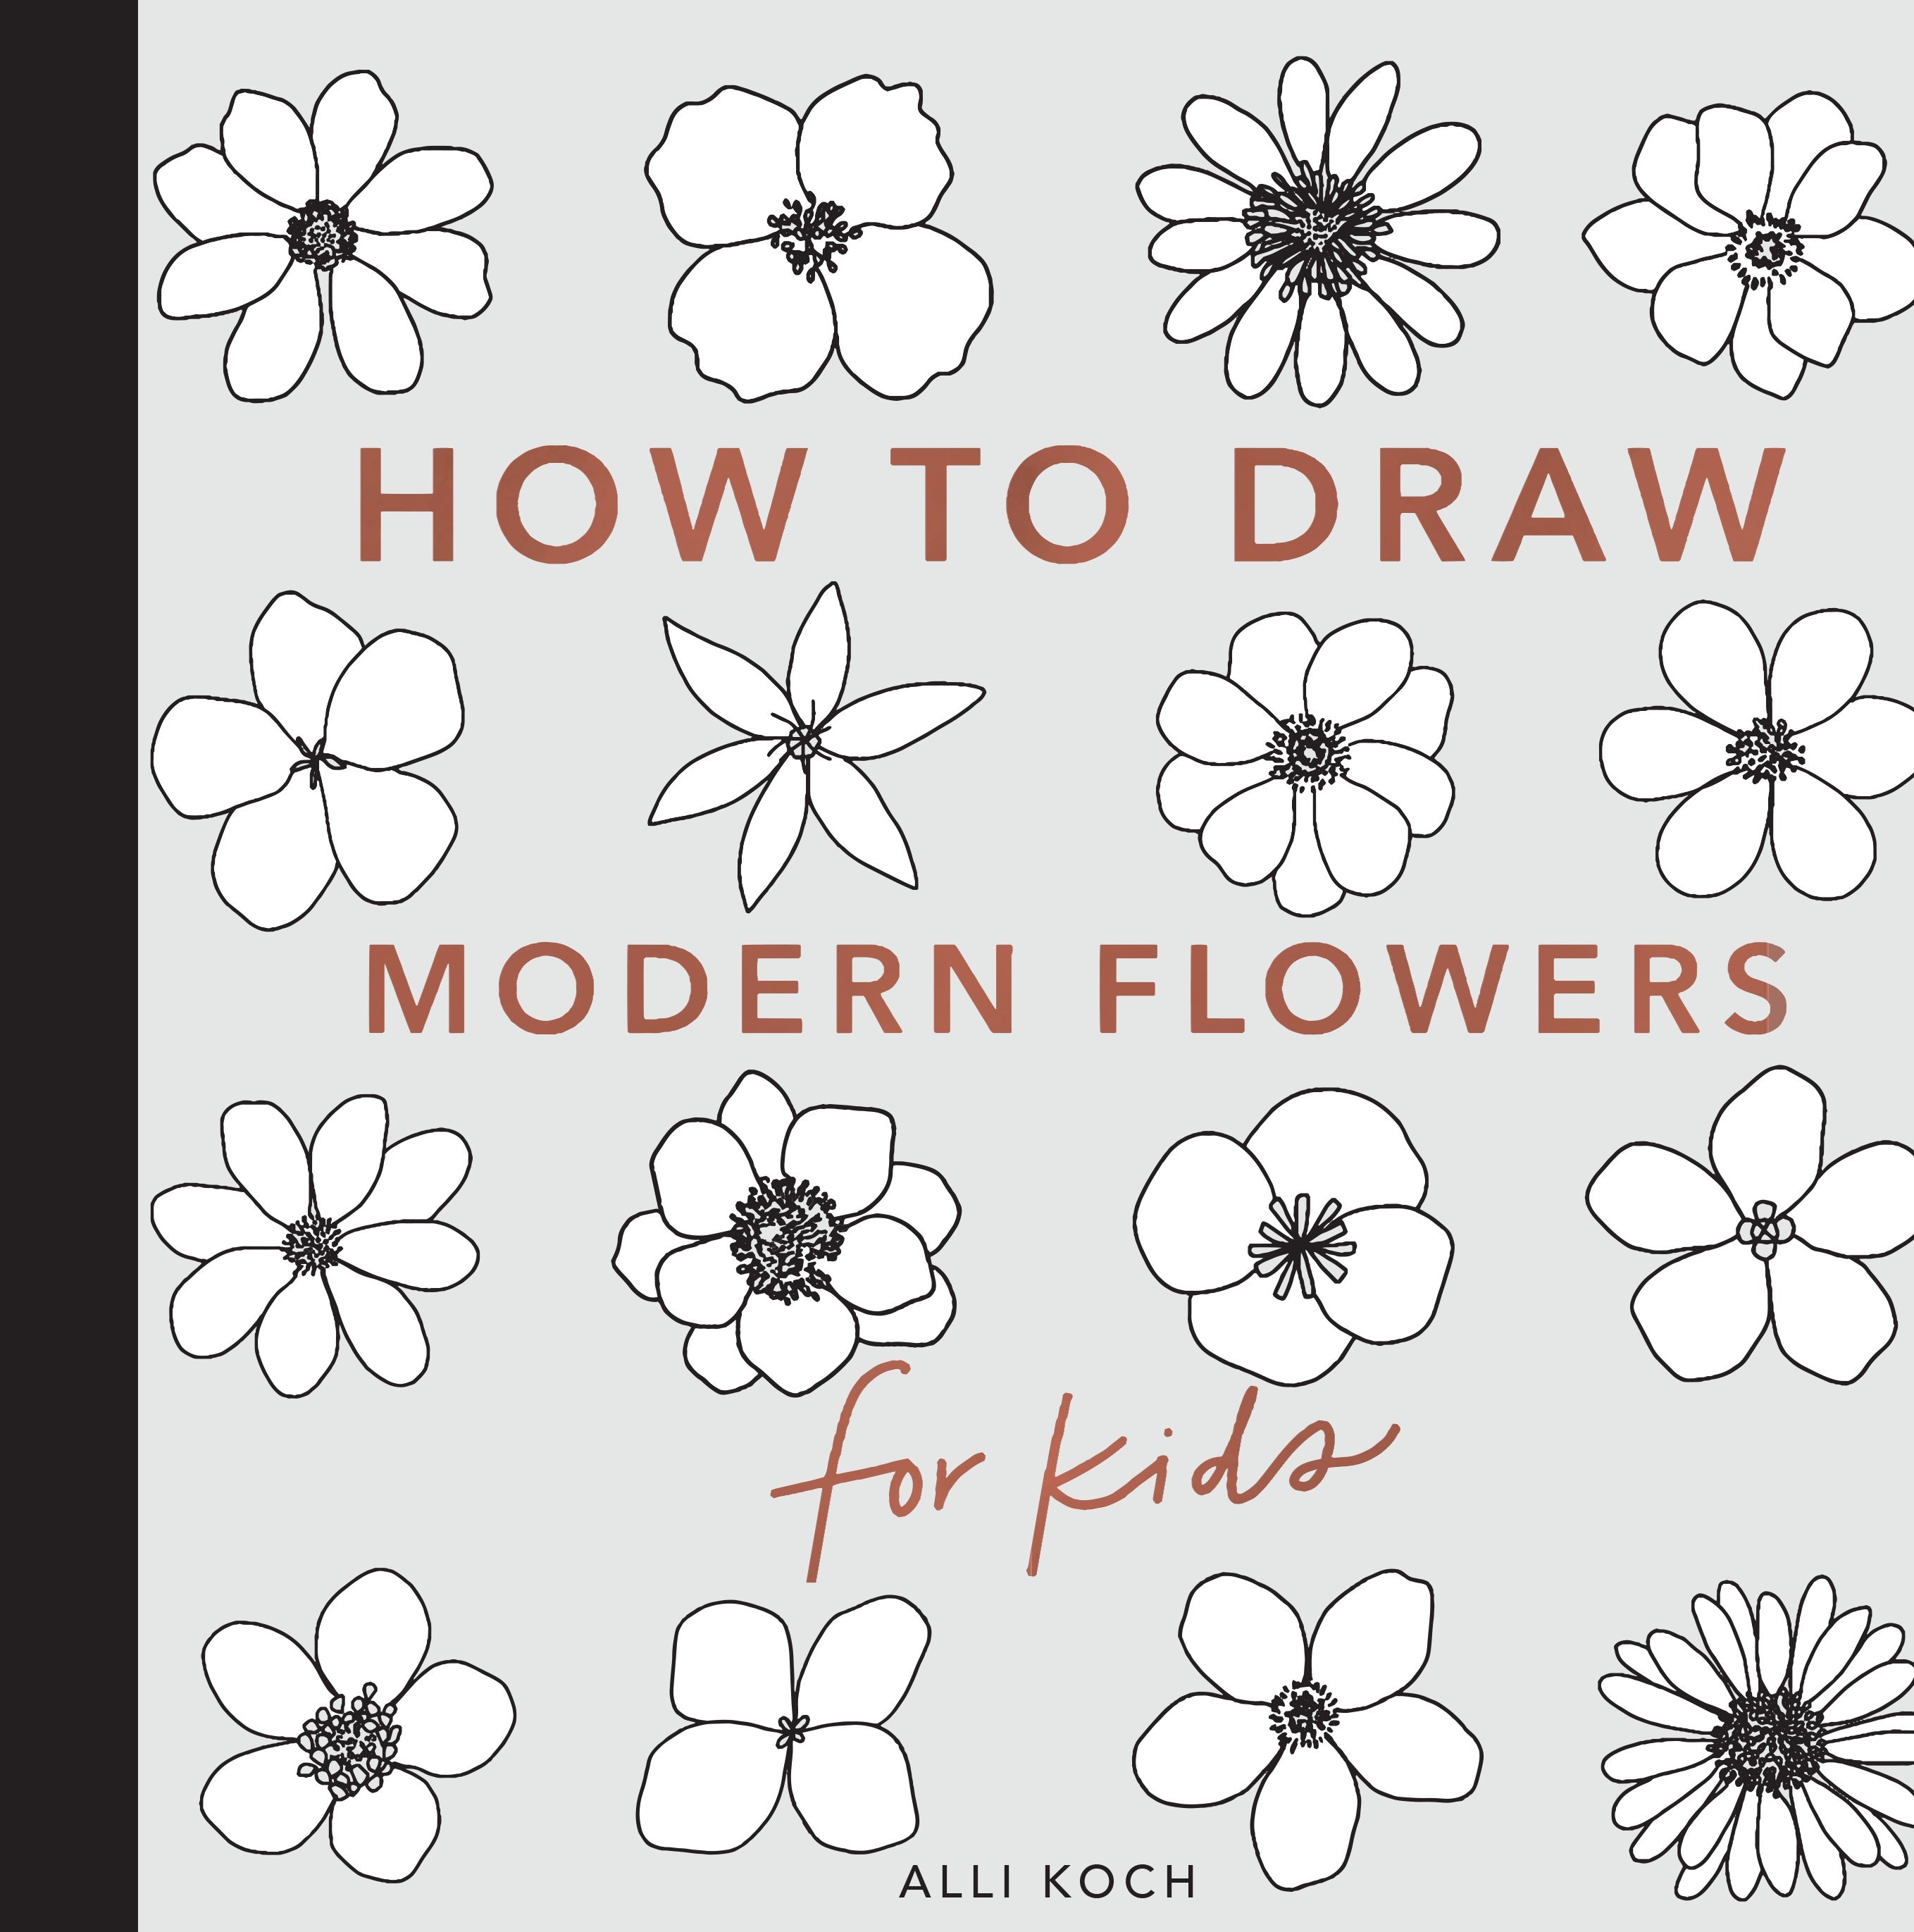 How to Draw: Modern Flowers - for kids